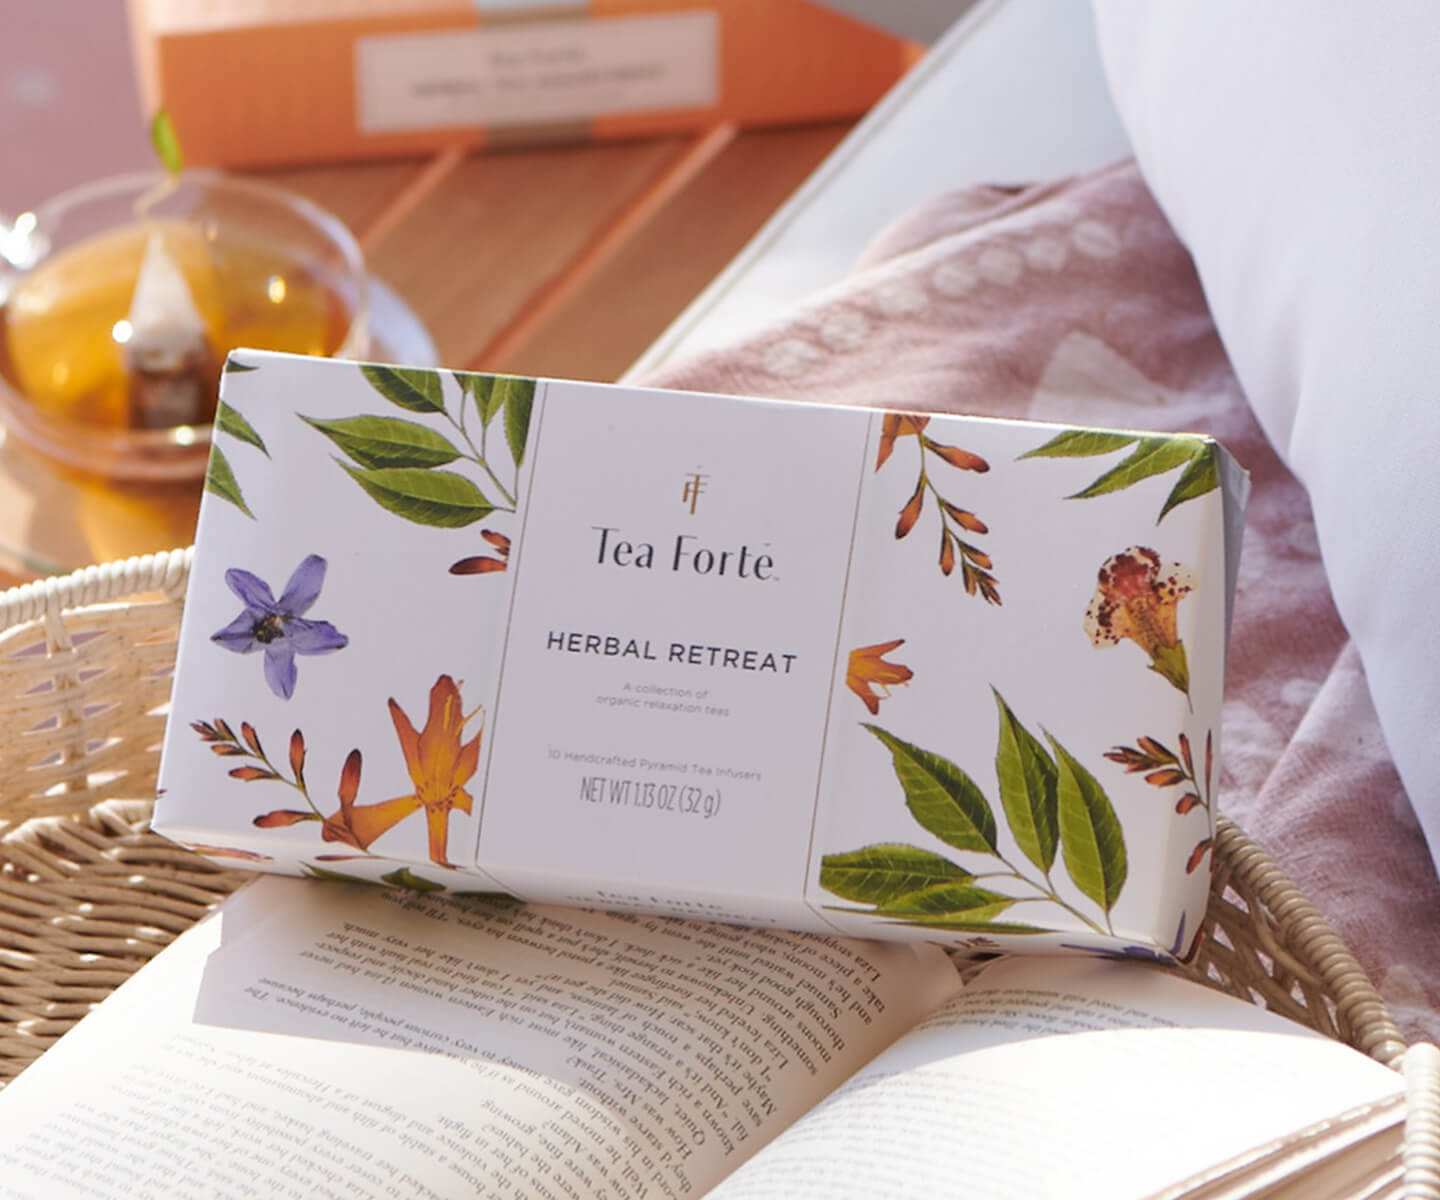 Herbal Retreat tea box with an open book and cup of tea